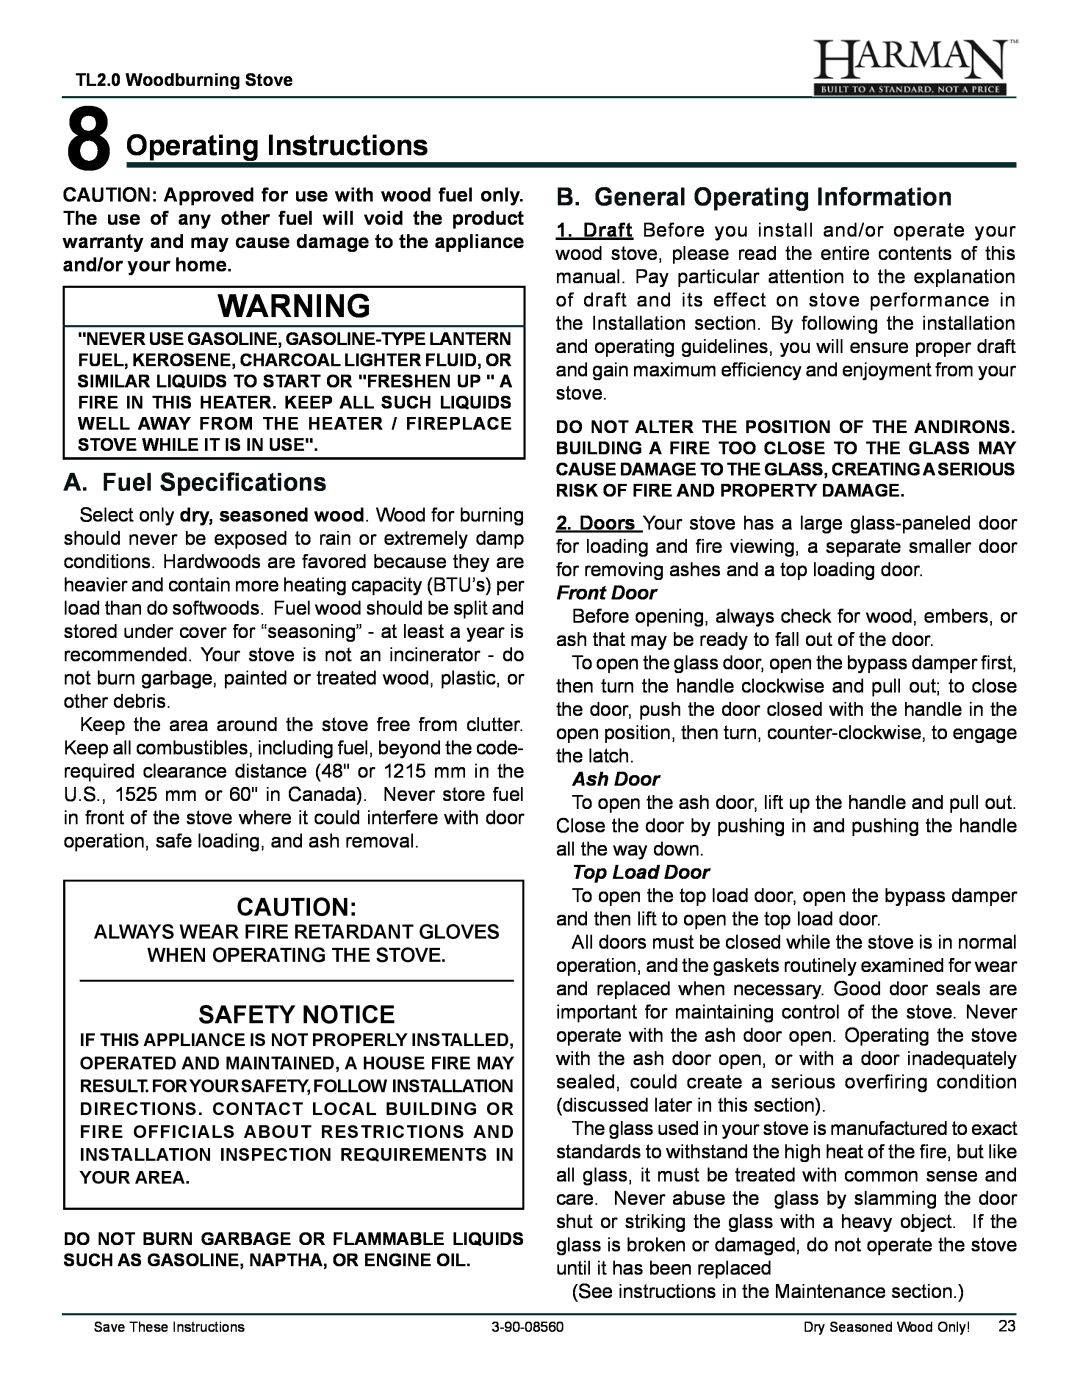 Harman Stove Company TL2.0 8Operating Instructions, A. Fuel Specifications, B. General Operating Information, Front Door 